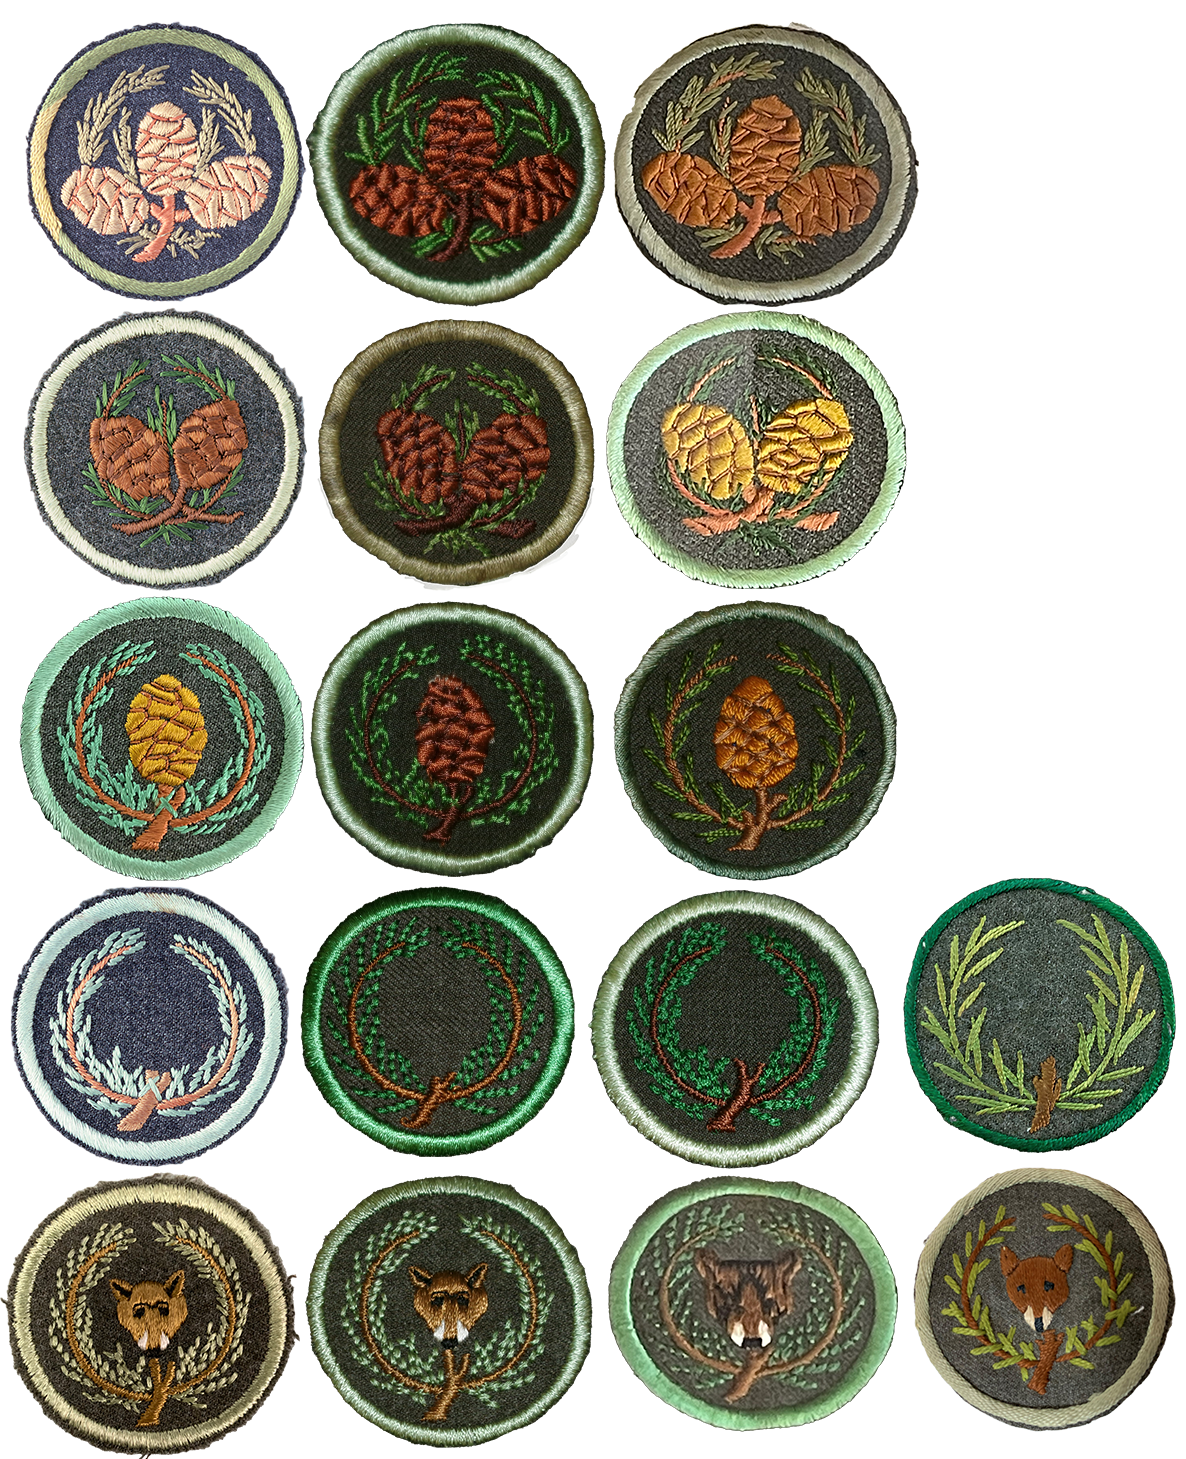 17 round patches for different ranger positions